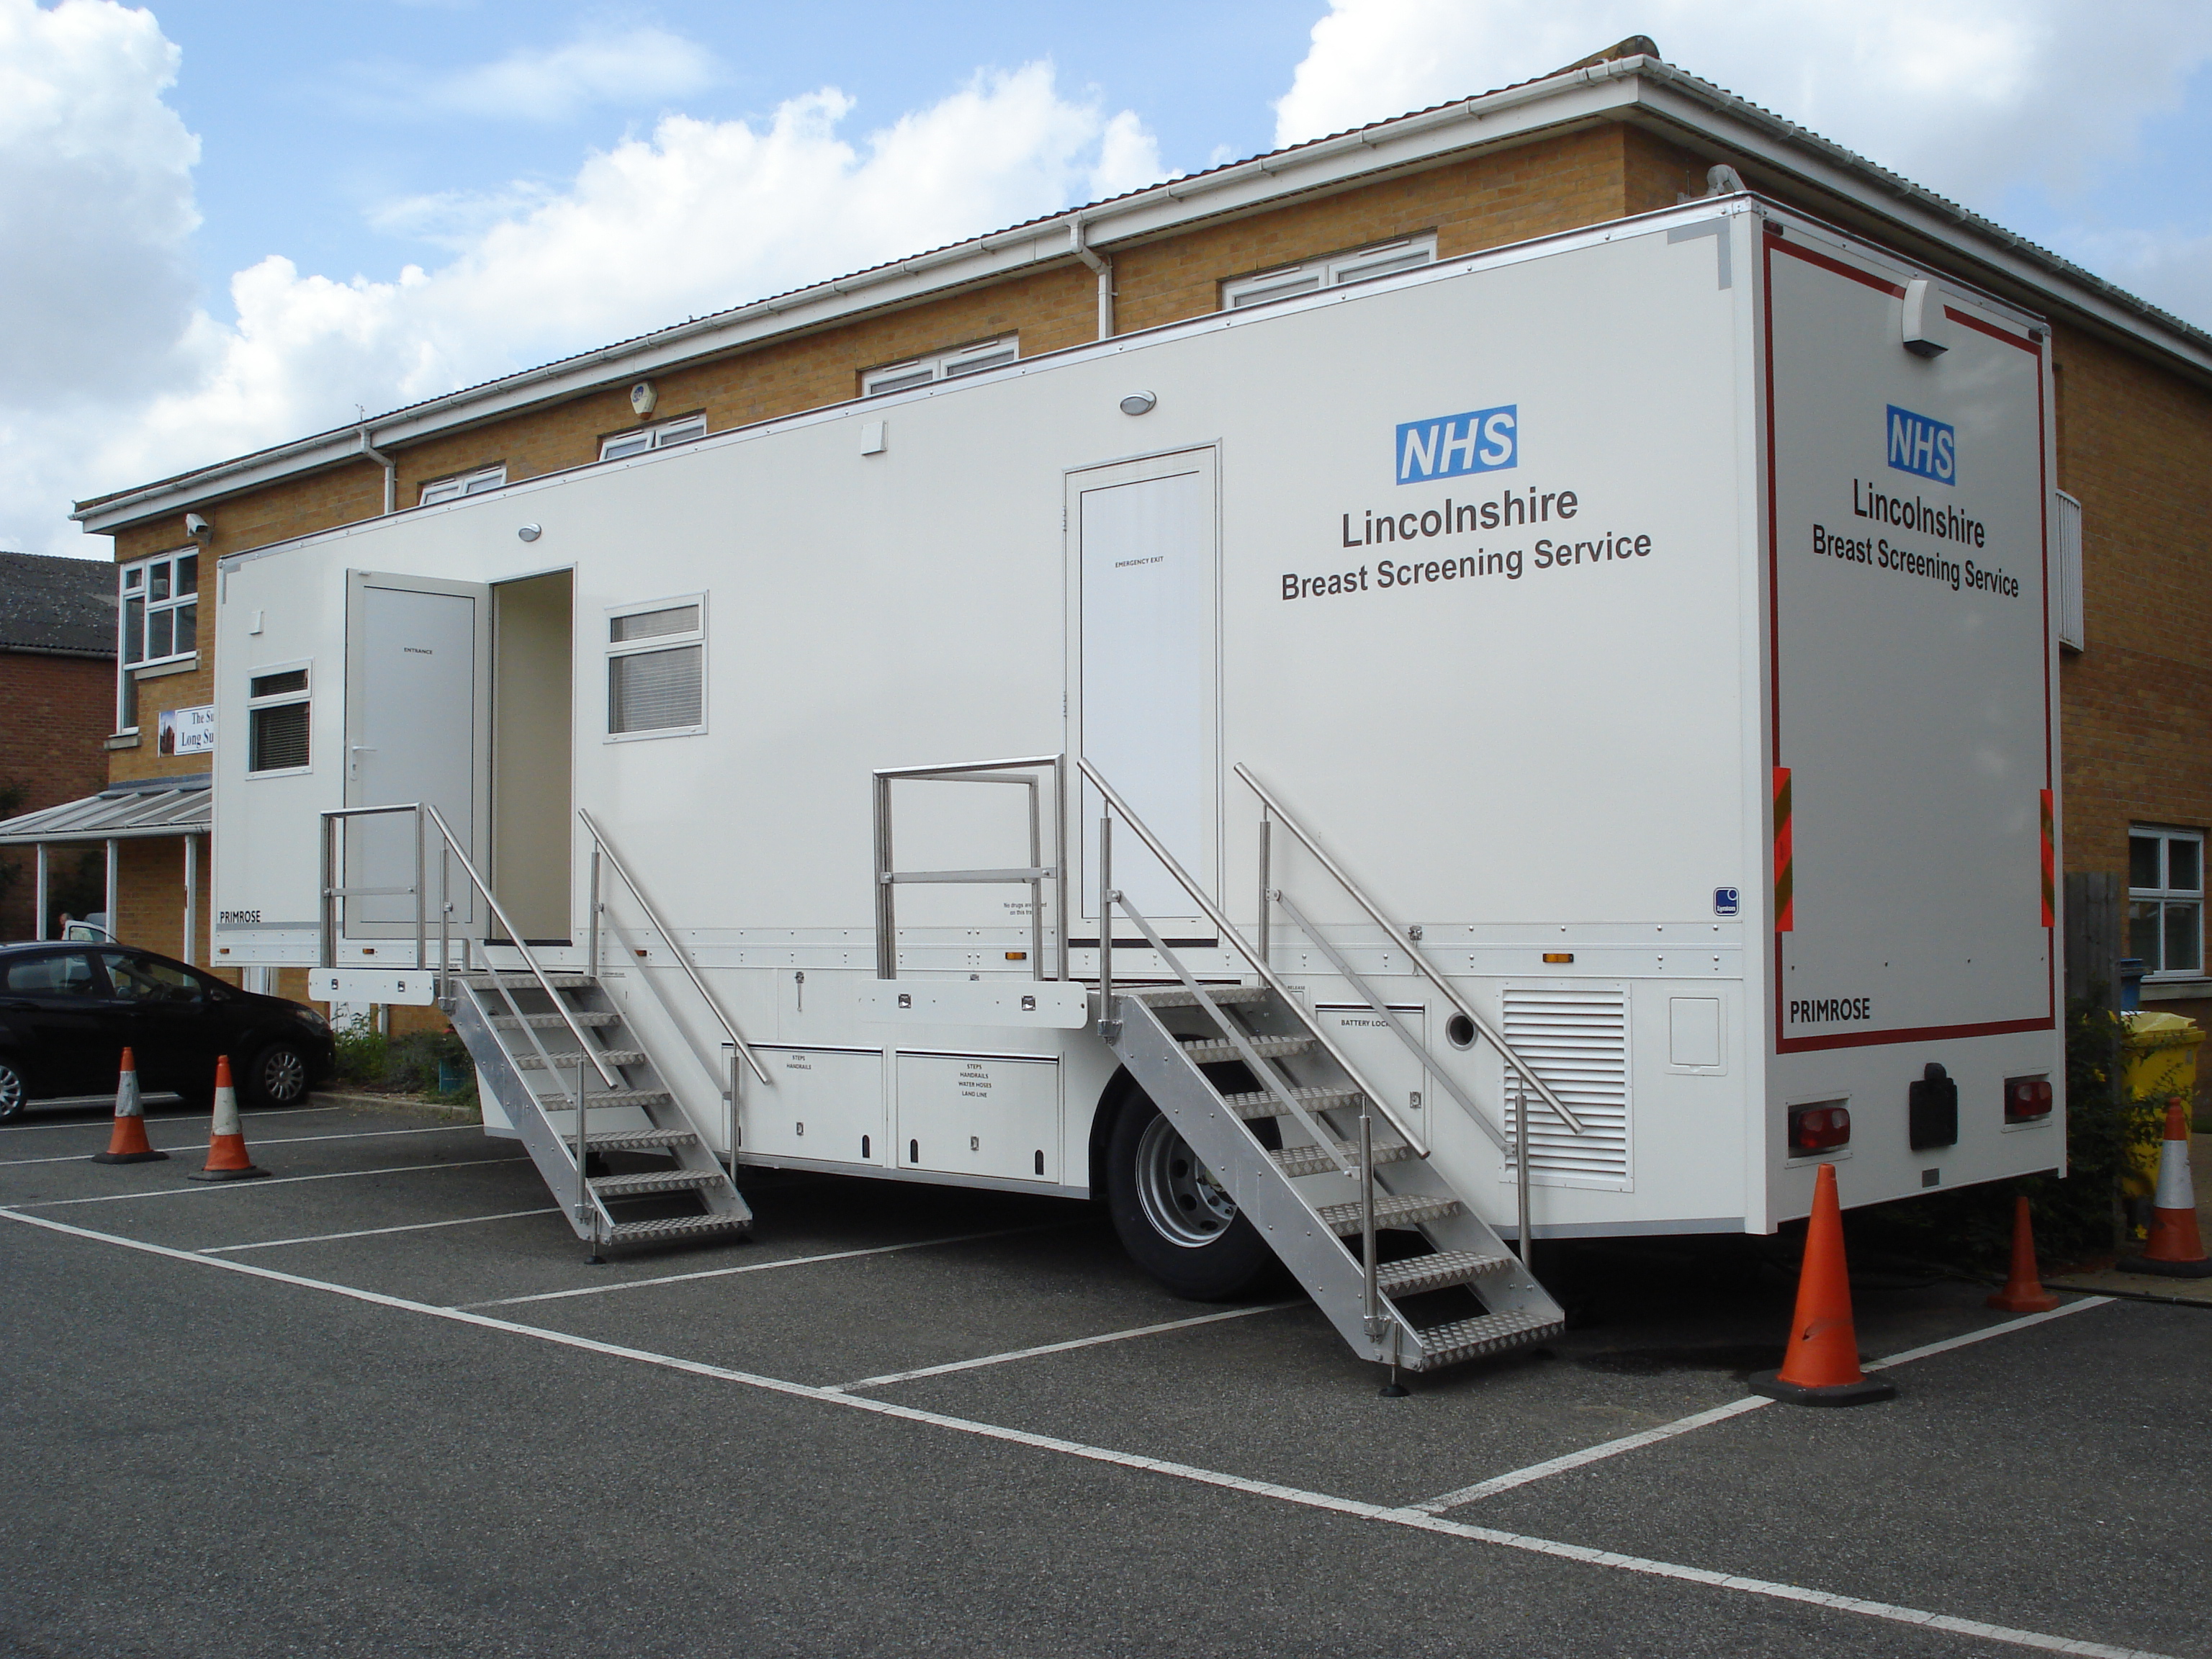 Mobile breast screening unit United Lincolnshire Hospitals